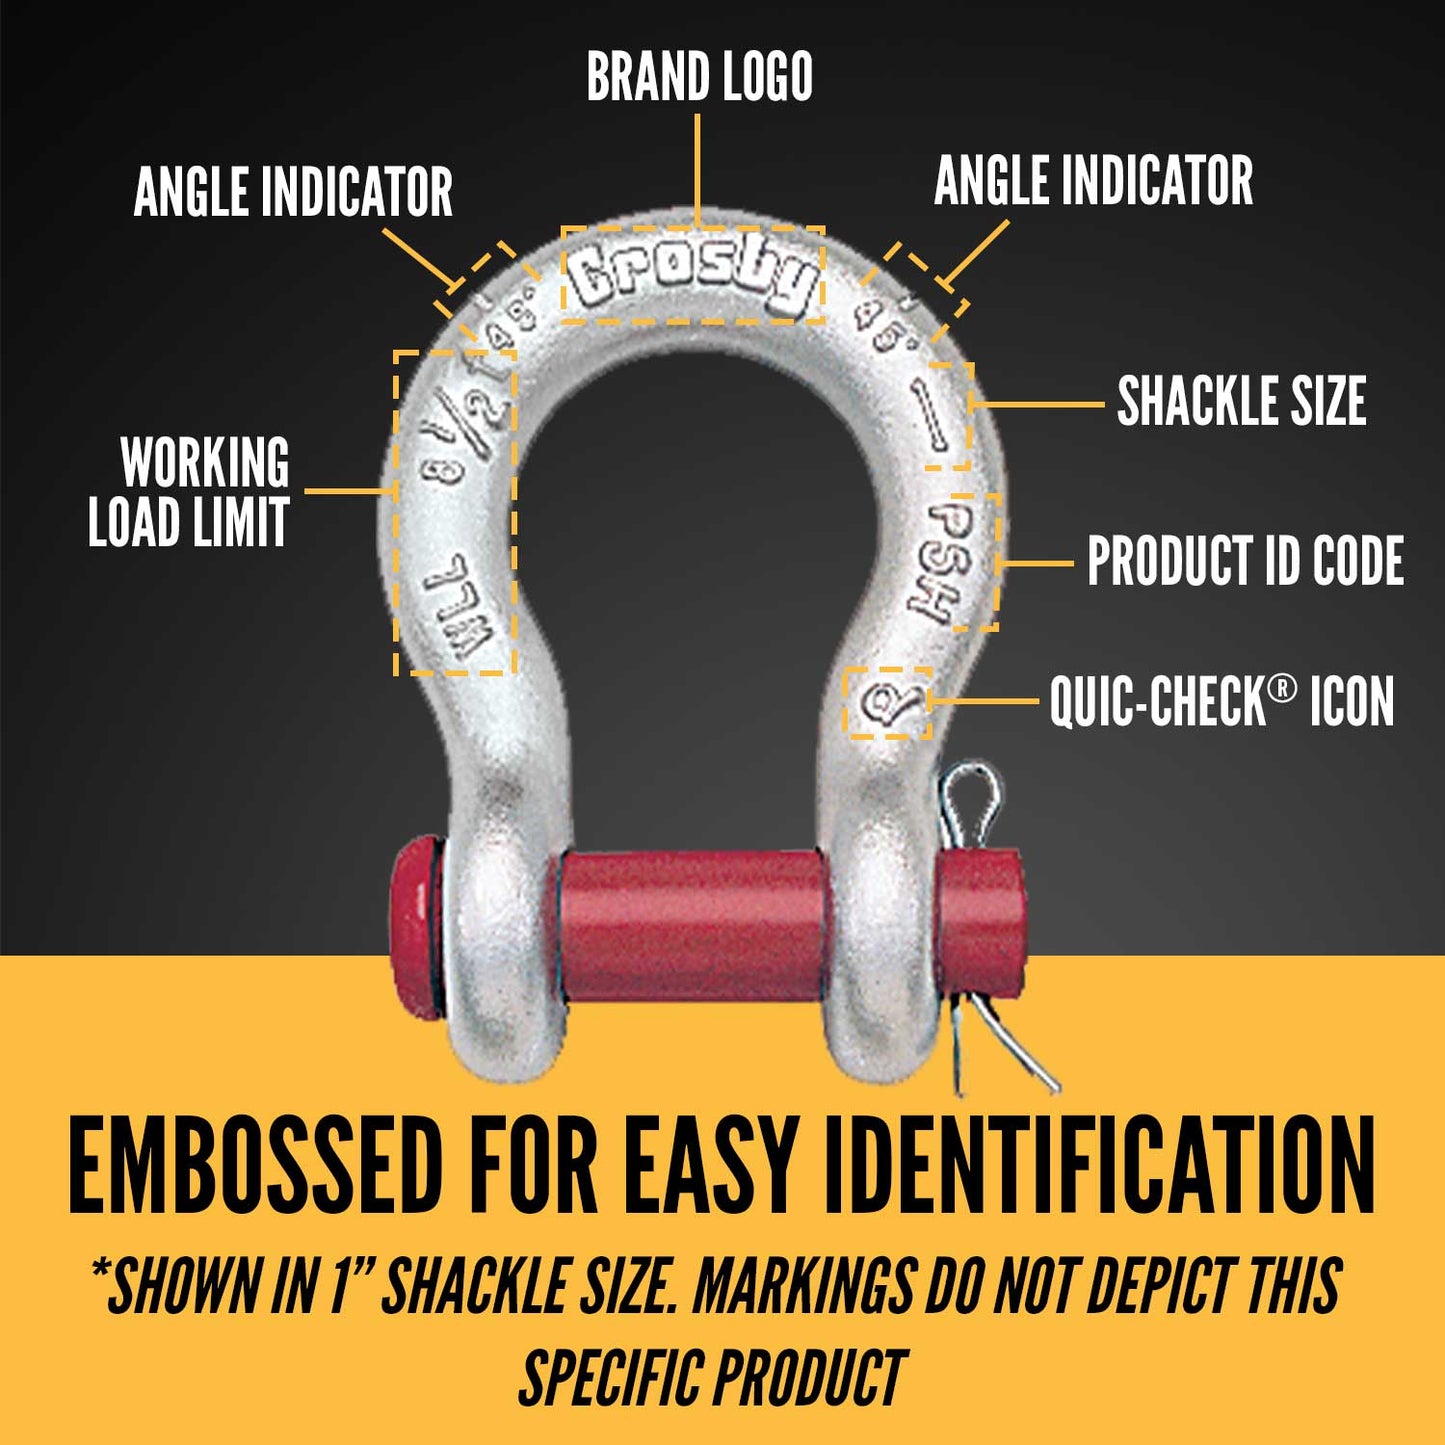 3/8" Crosby® Round Pin Anchor Shackle | G-213 - 1 Ton embossed for easy identification